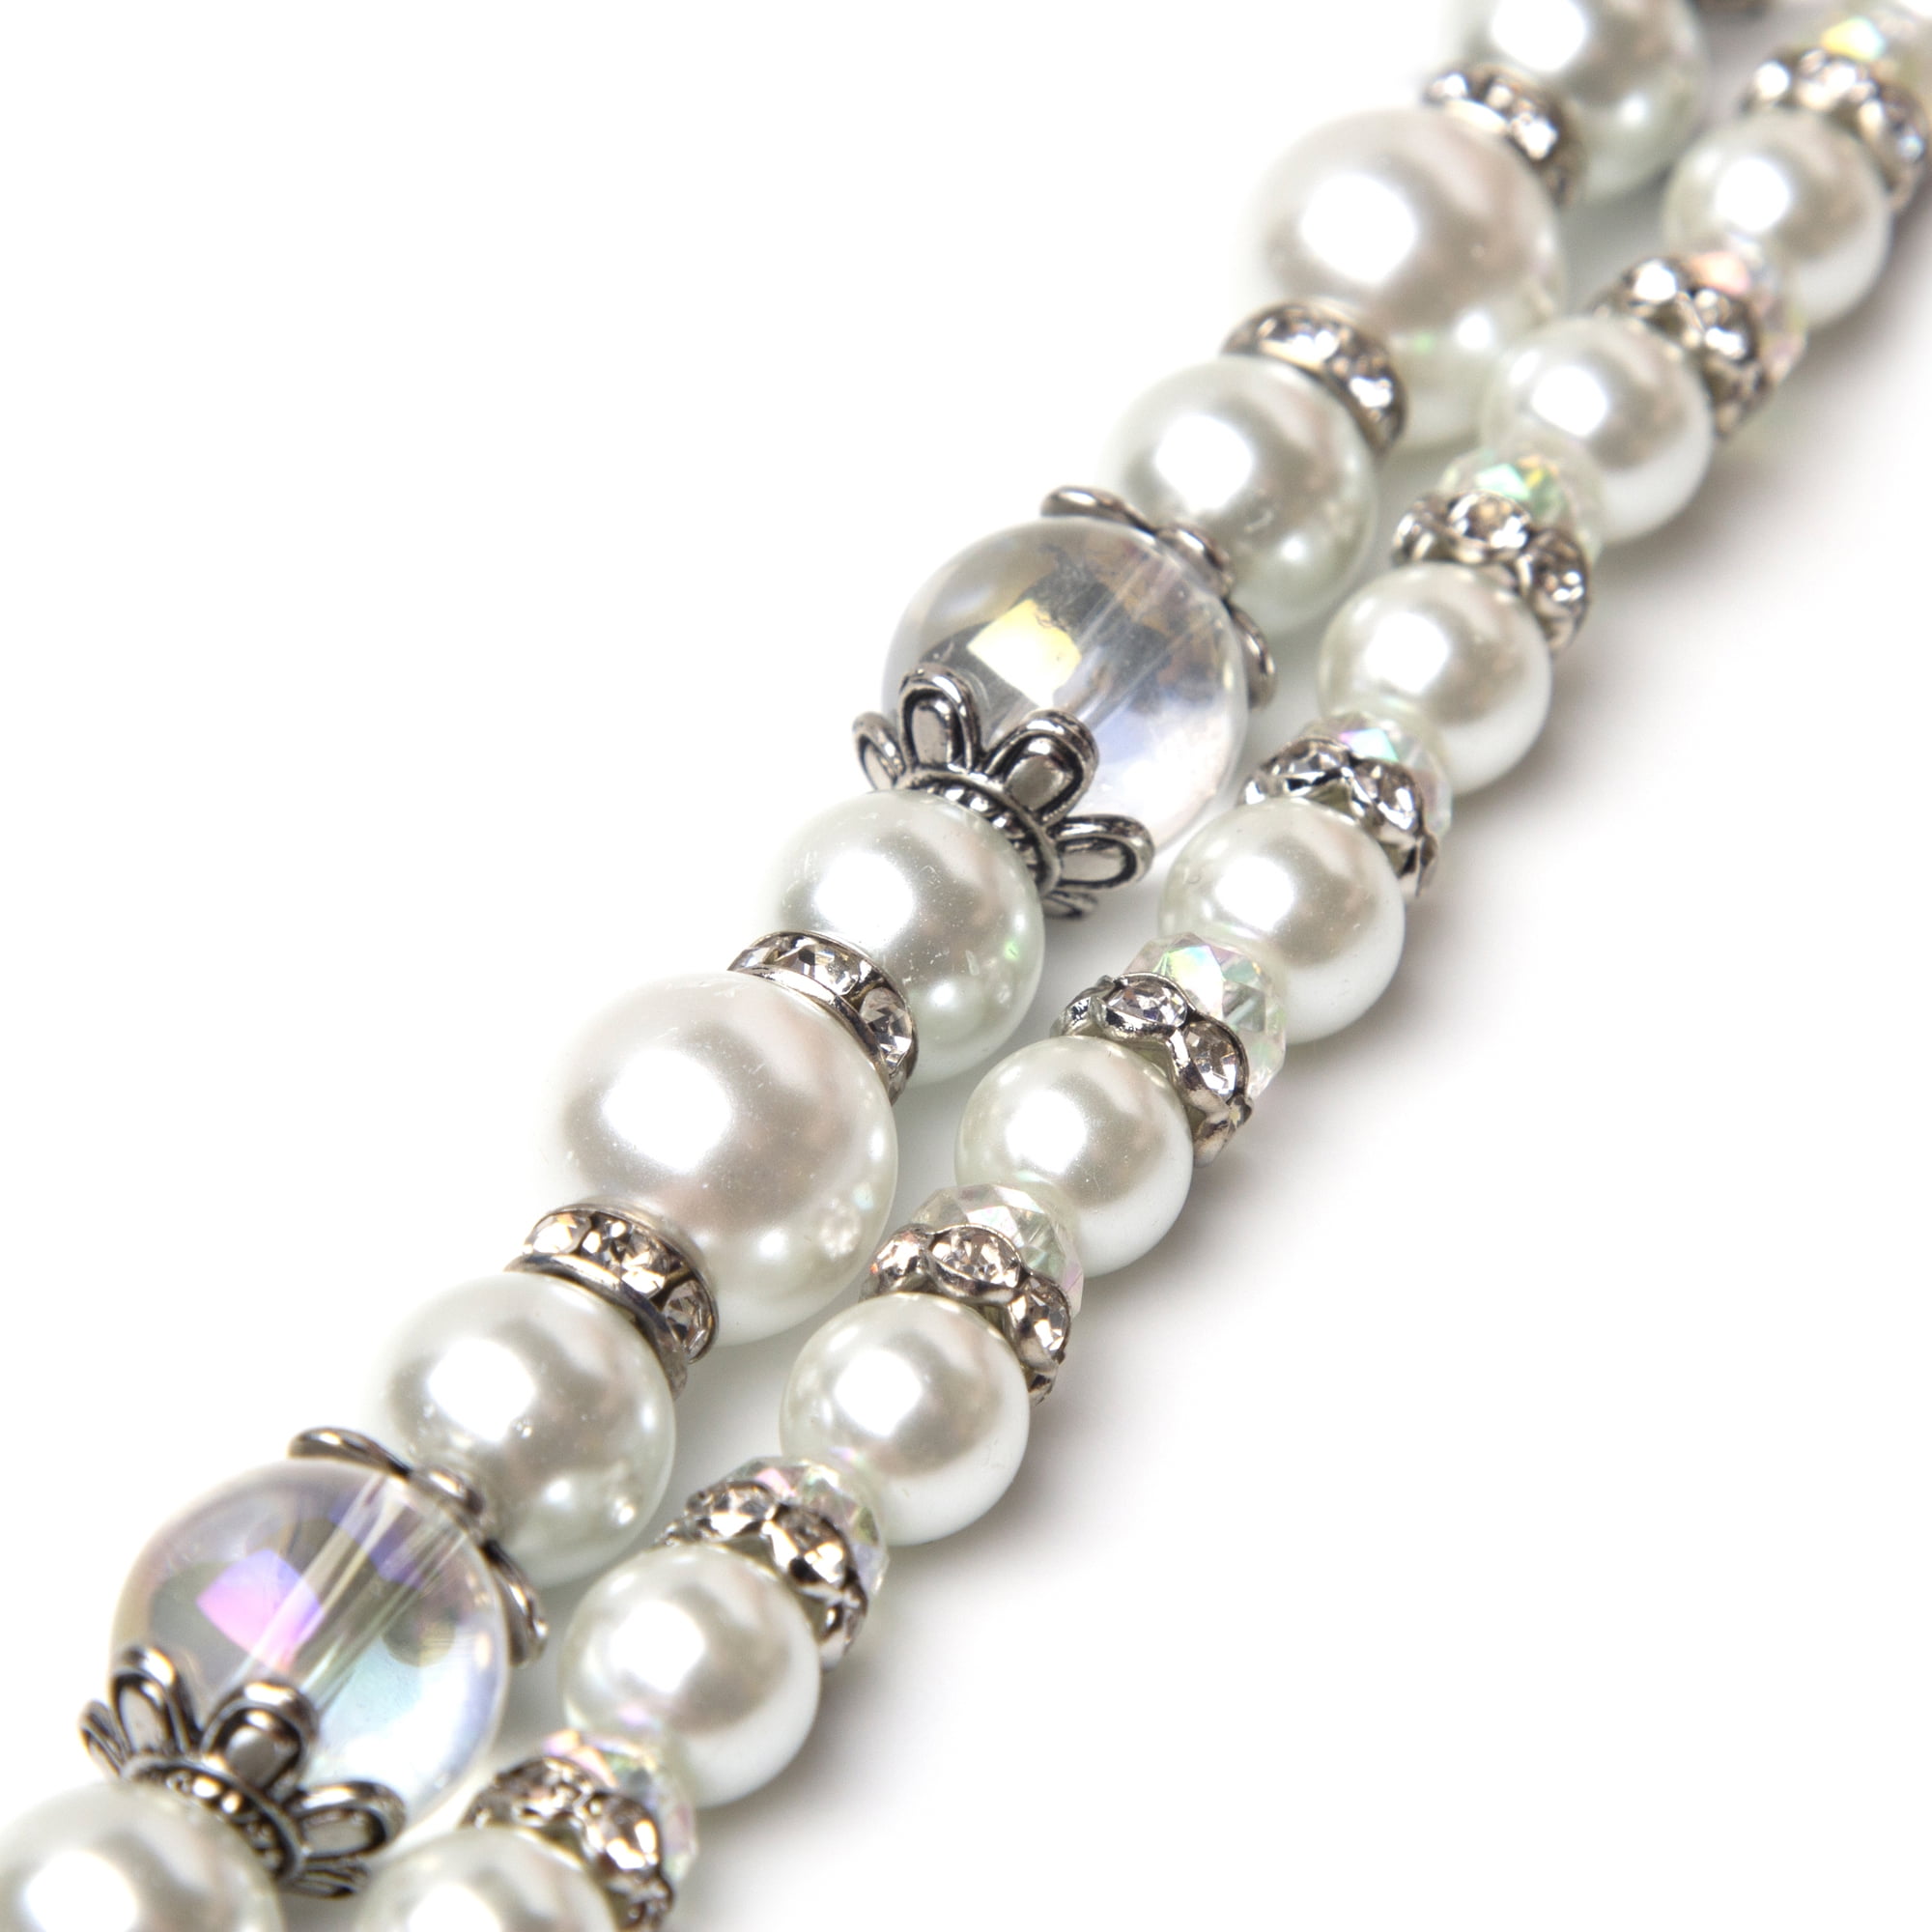 Men's Pearl Wristband with Hand-Painted Glass Beads XL (19cm / 7.5”)